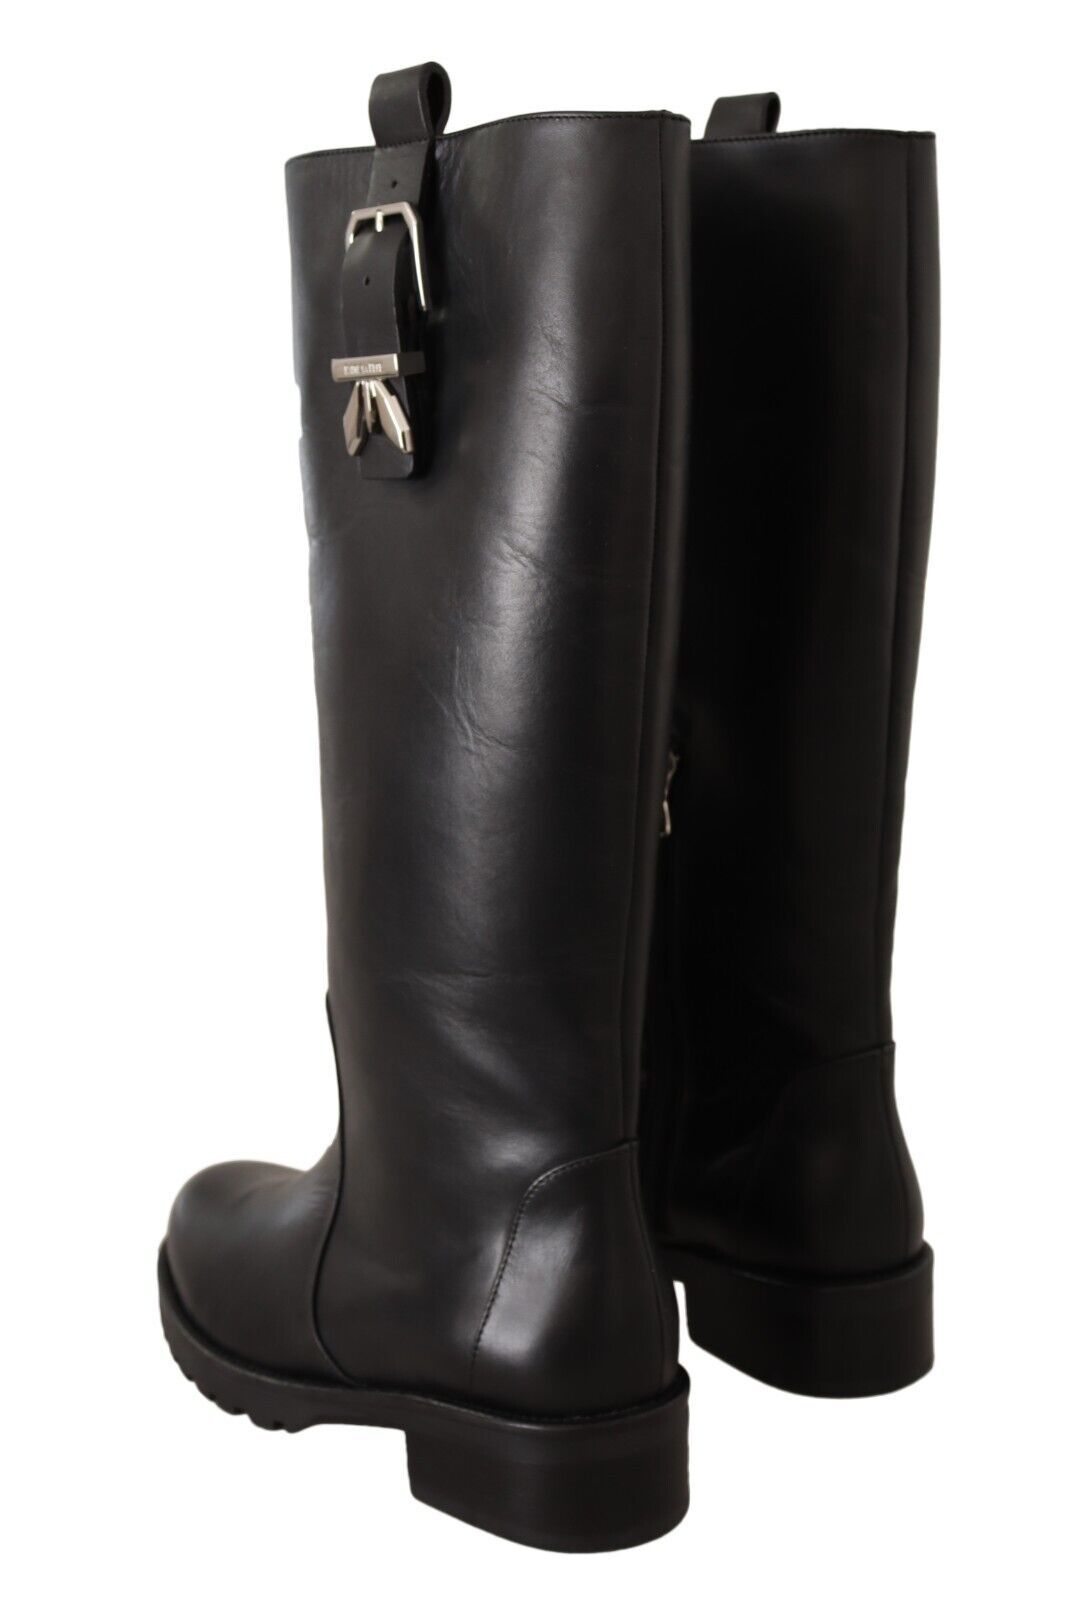 Elegant Leather High Boots for High Fashion Appeal